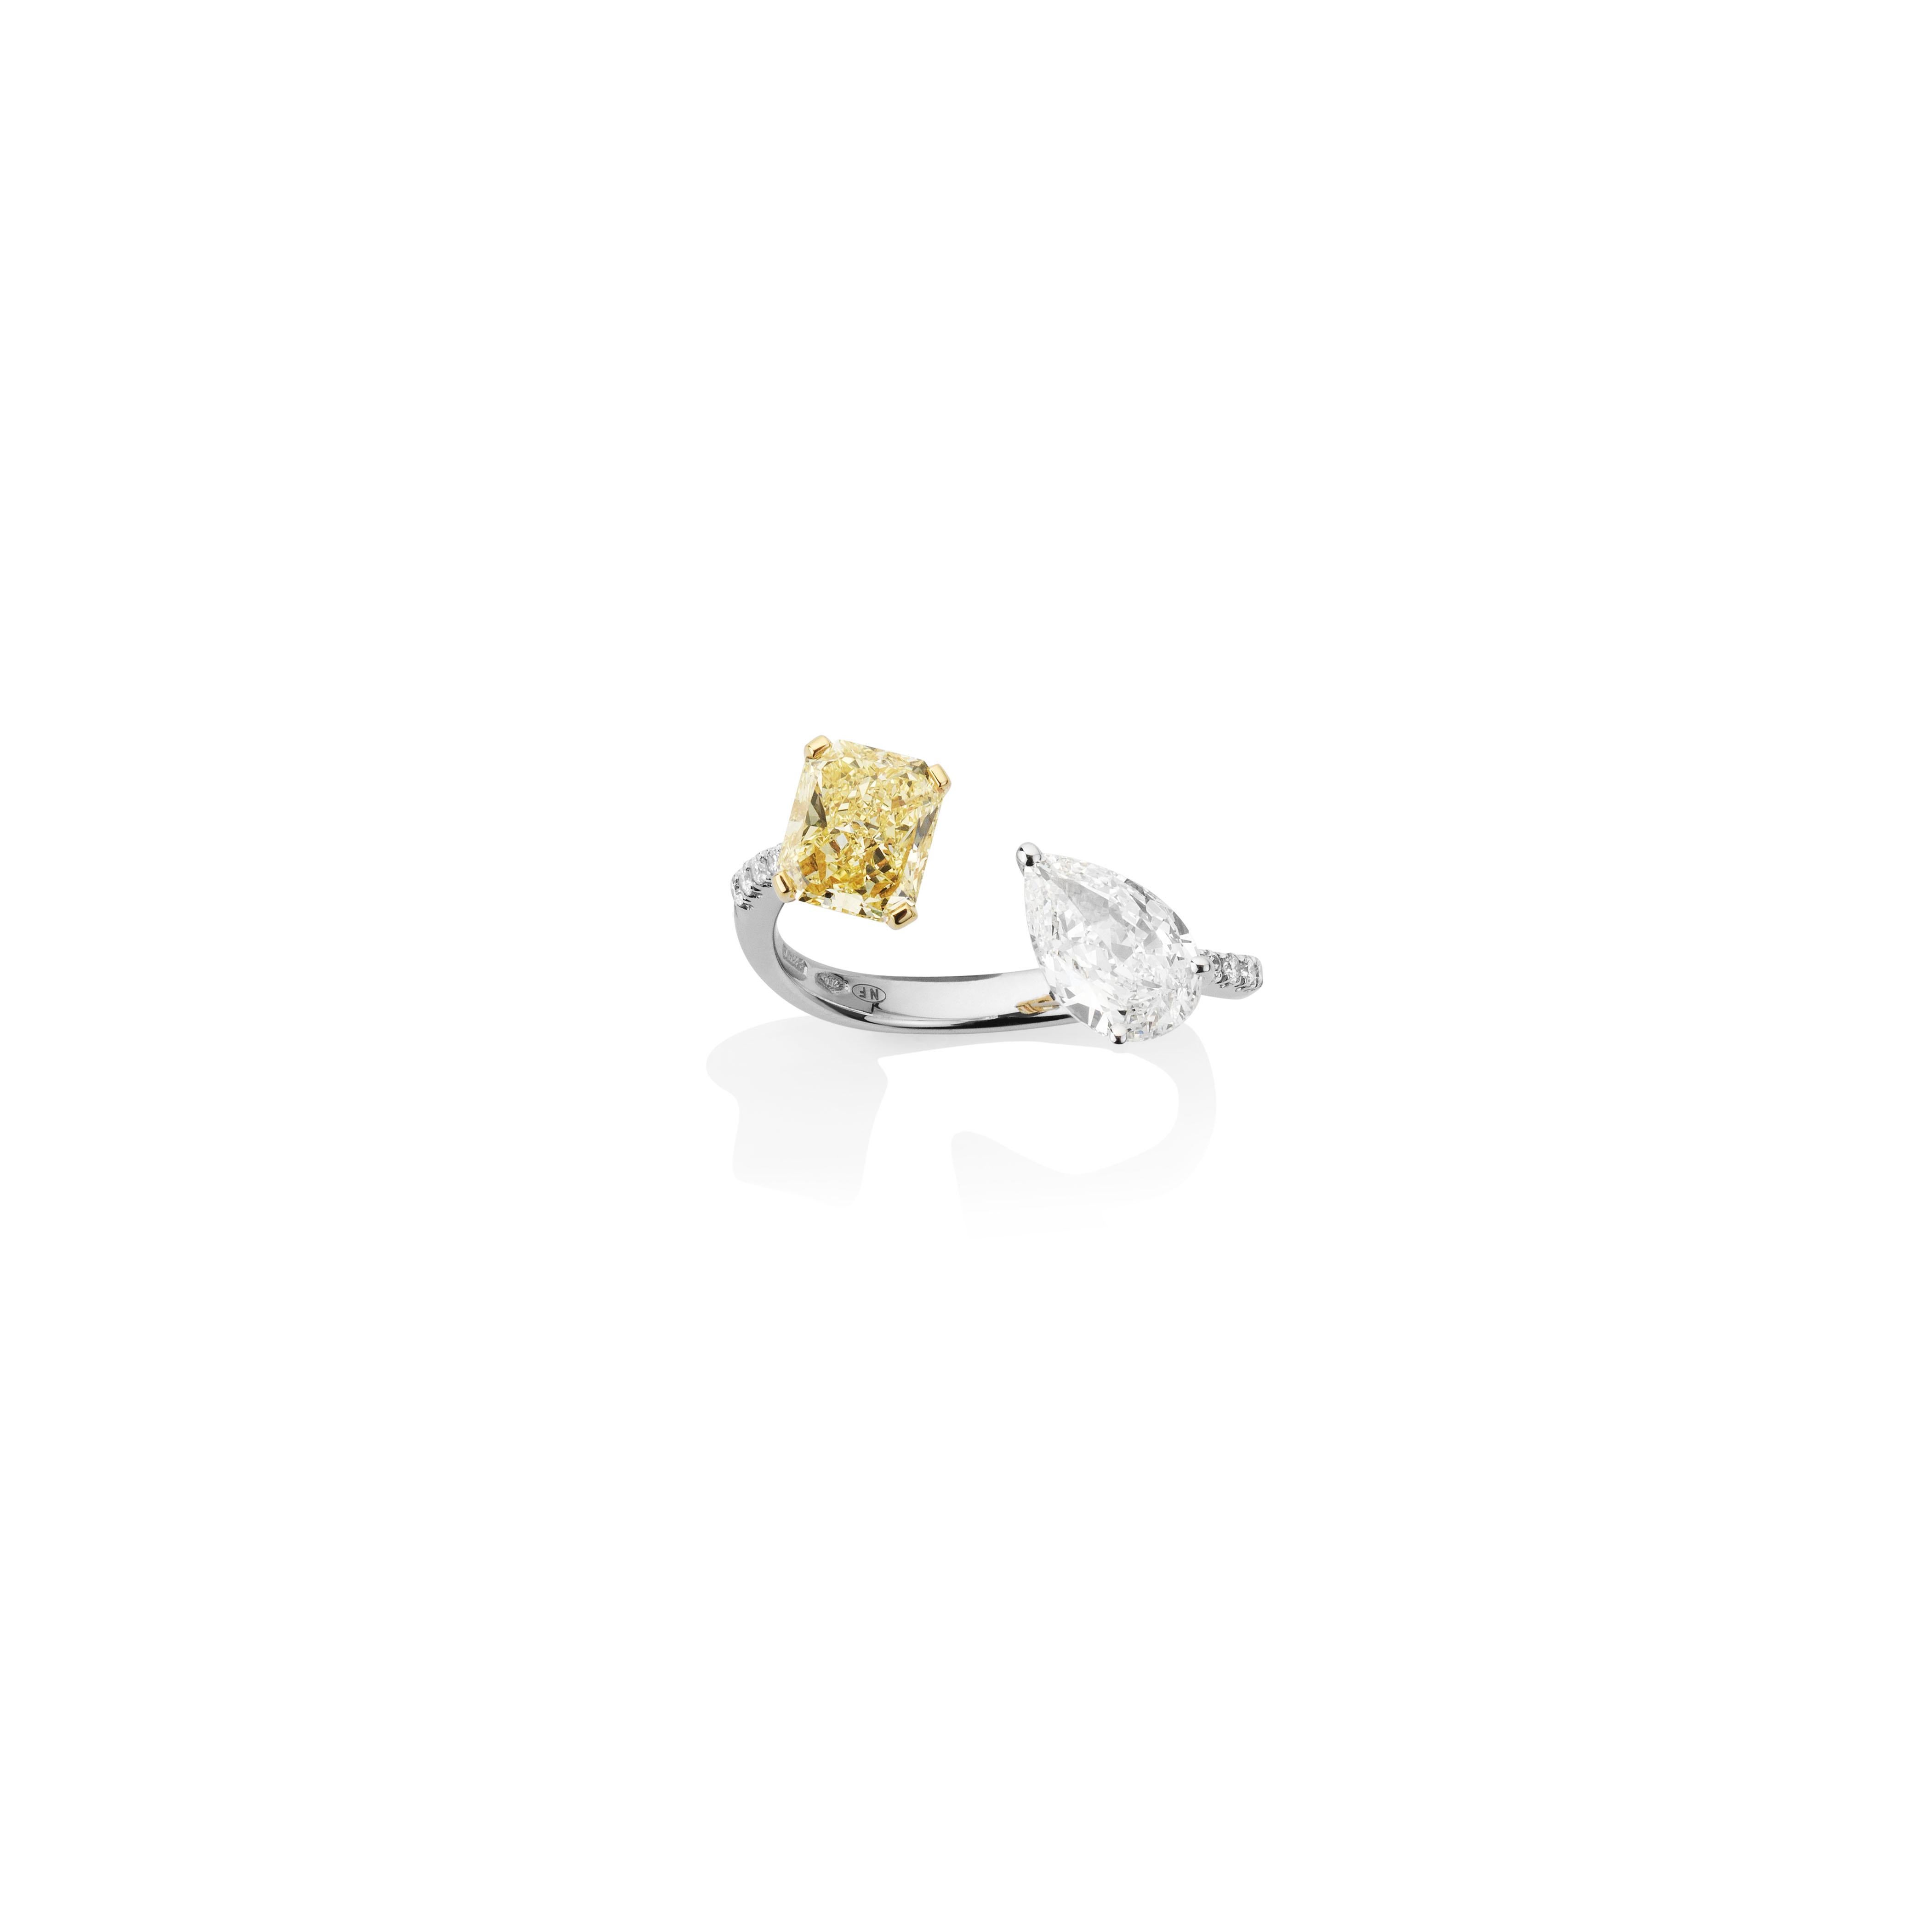 You and me, 2 diamonds with 2 different stories. A radiant-cut yellow diamond sits opposite a pear-shaped partner in our iconic Toi et Moi open ring.

0.82 ct Radiant Cut Fancy Yellow VS1 clarity
0.73 ct Pear shape, G colour, VS1 clarity
10.00 g 18